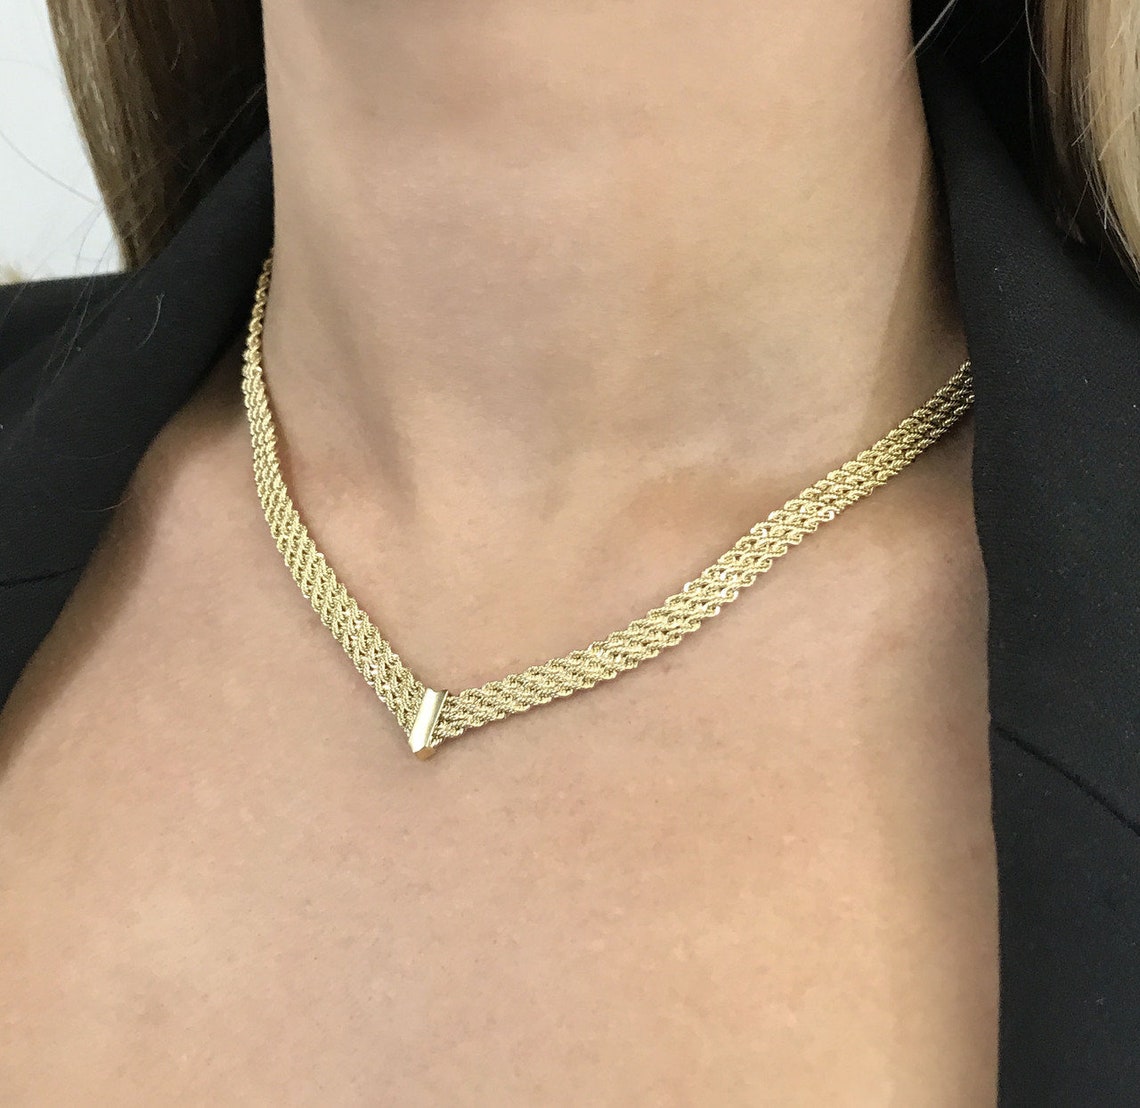 IROLD 14K Yellow Gold Rope Chain Necklace - 14K Italian Yellow Gold Rope Necklace Chain